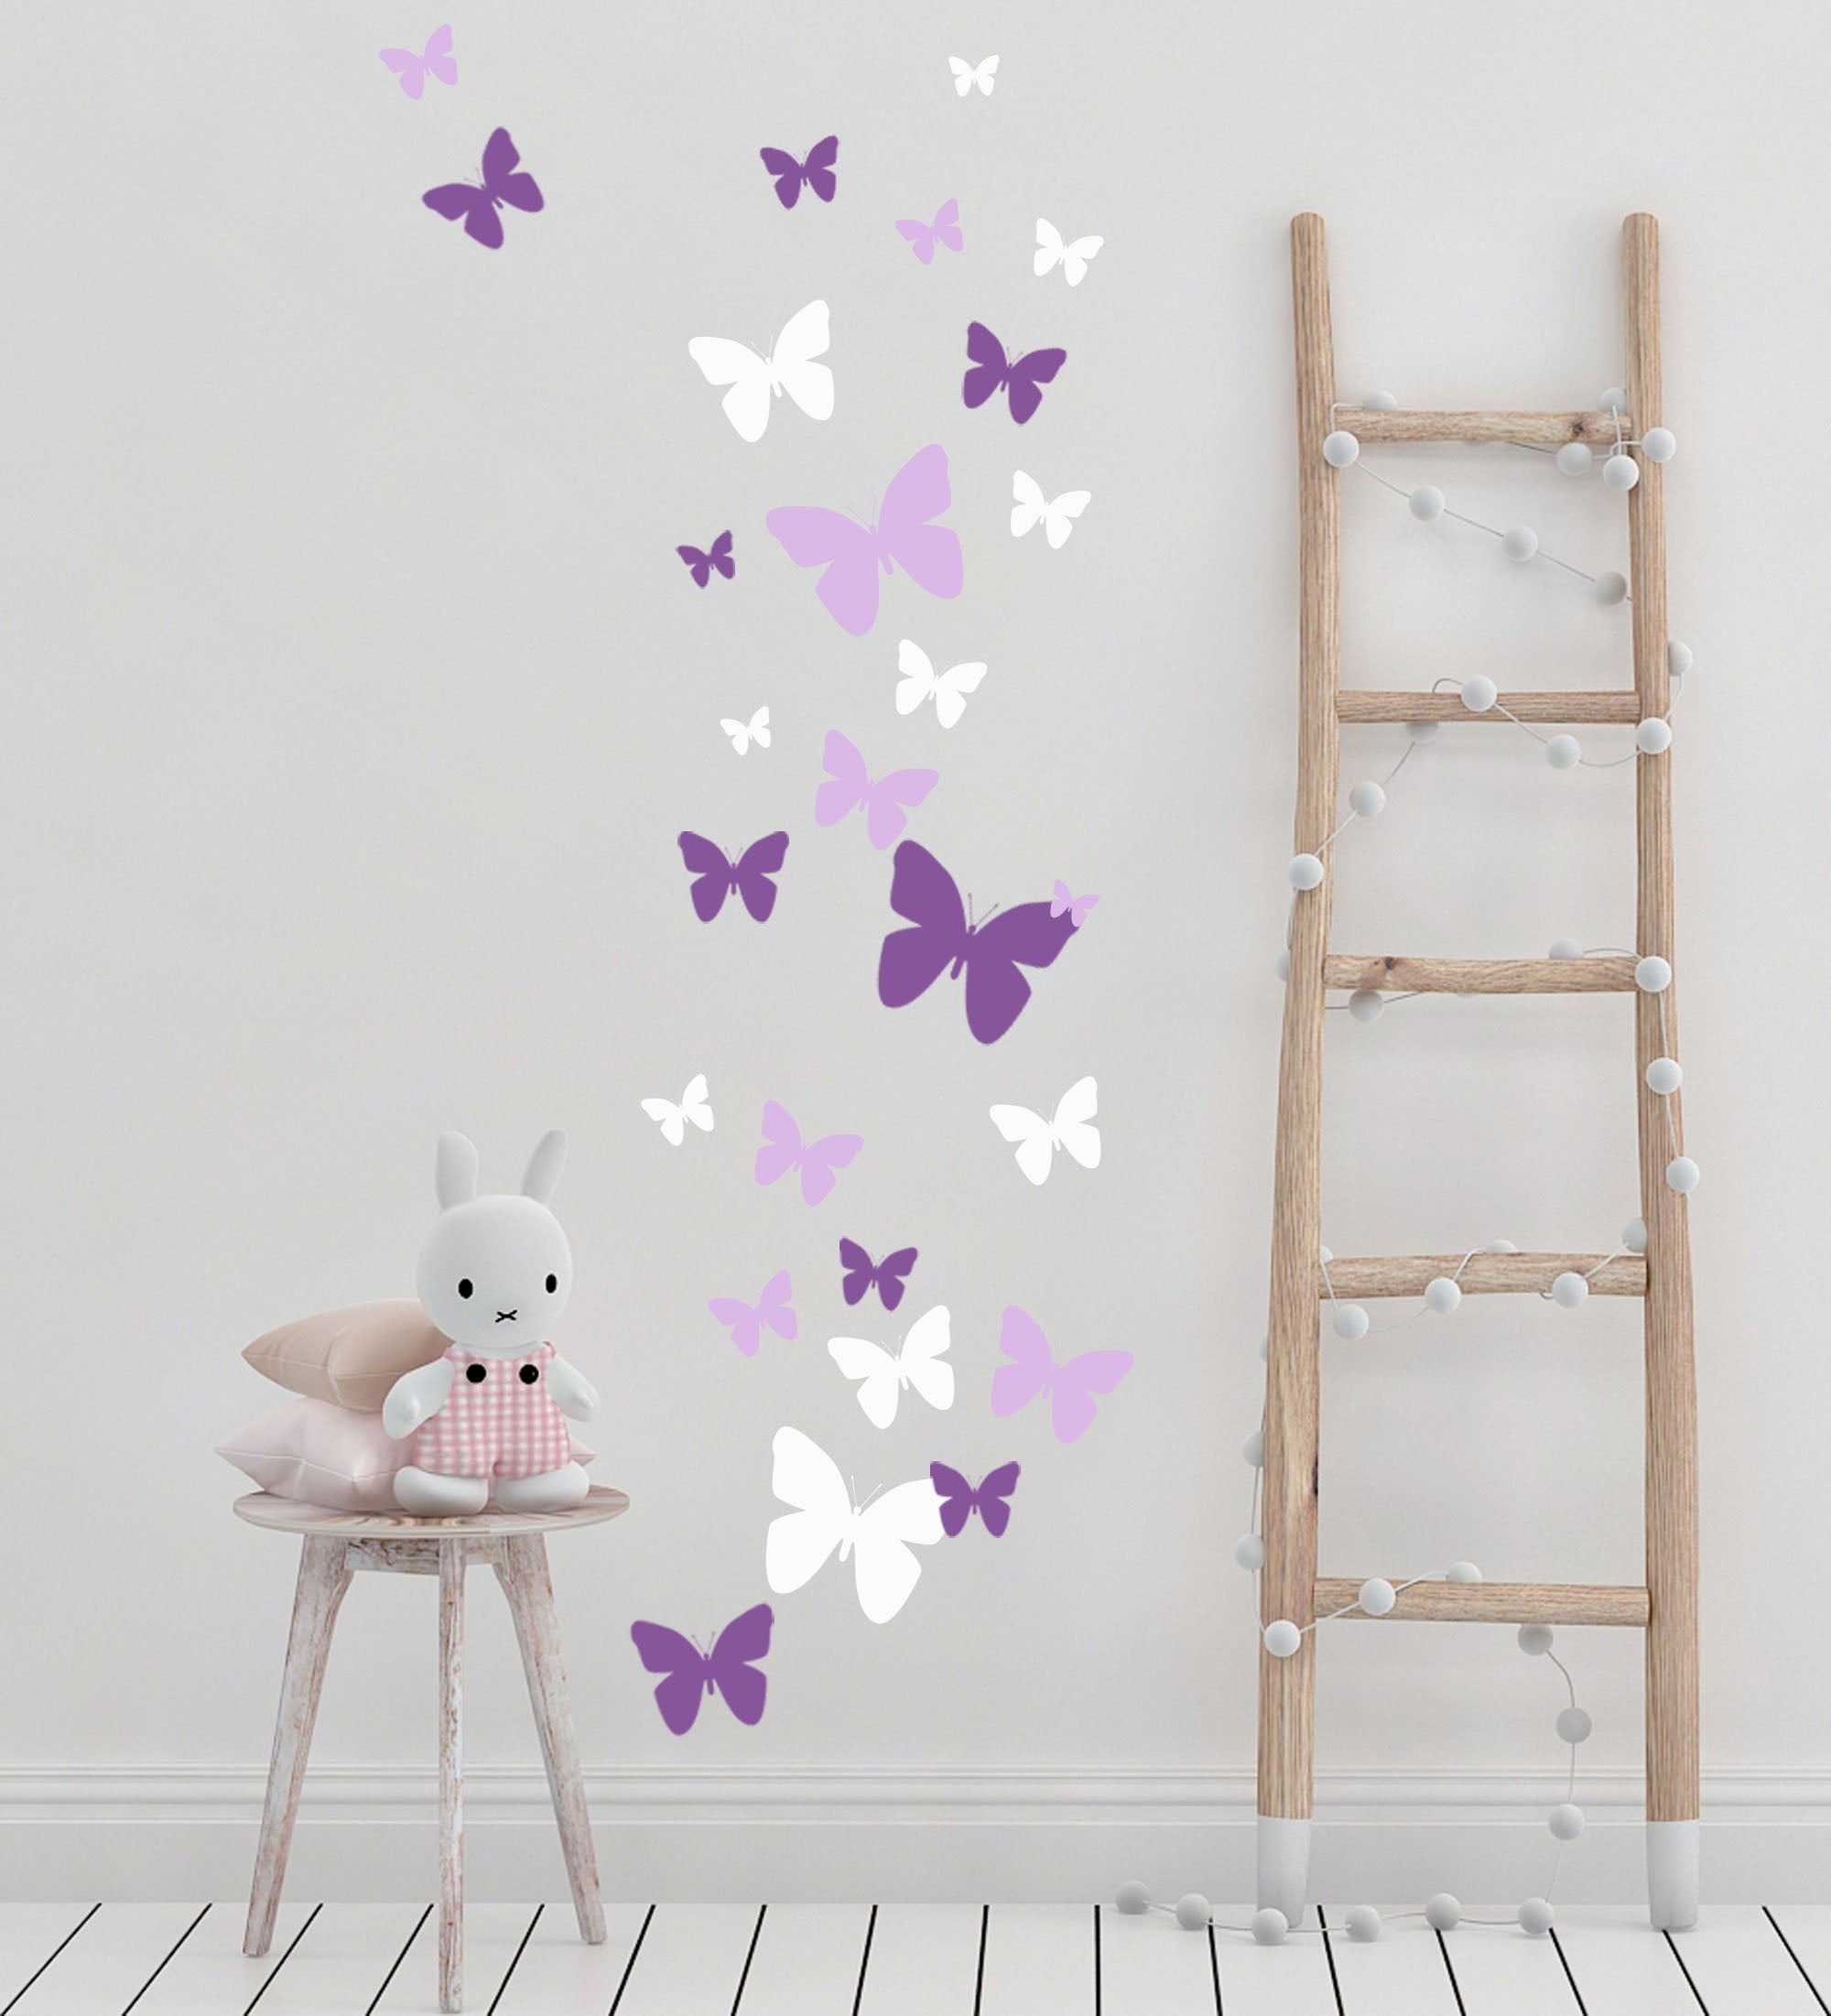 Butterfly Girl Wall Stickers Flower Fairy Wall Decal Pink Floral